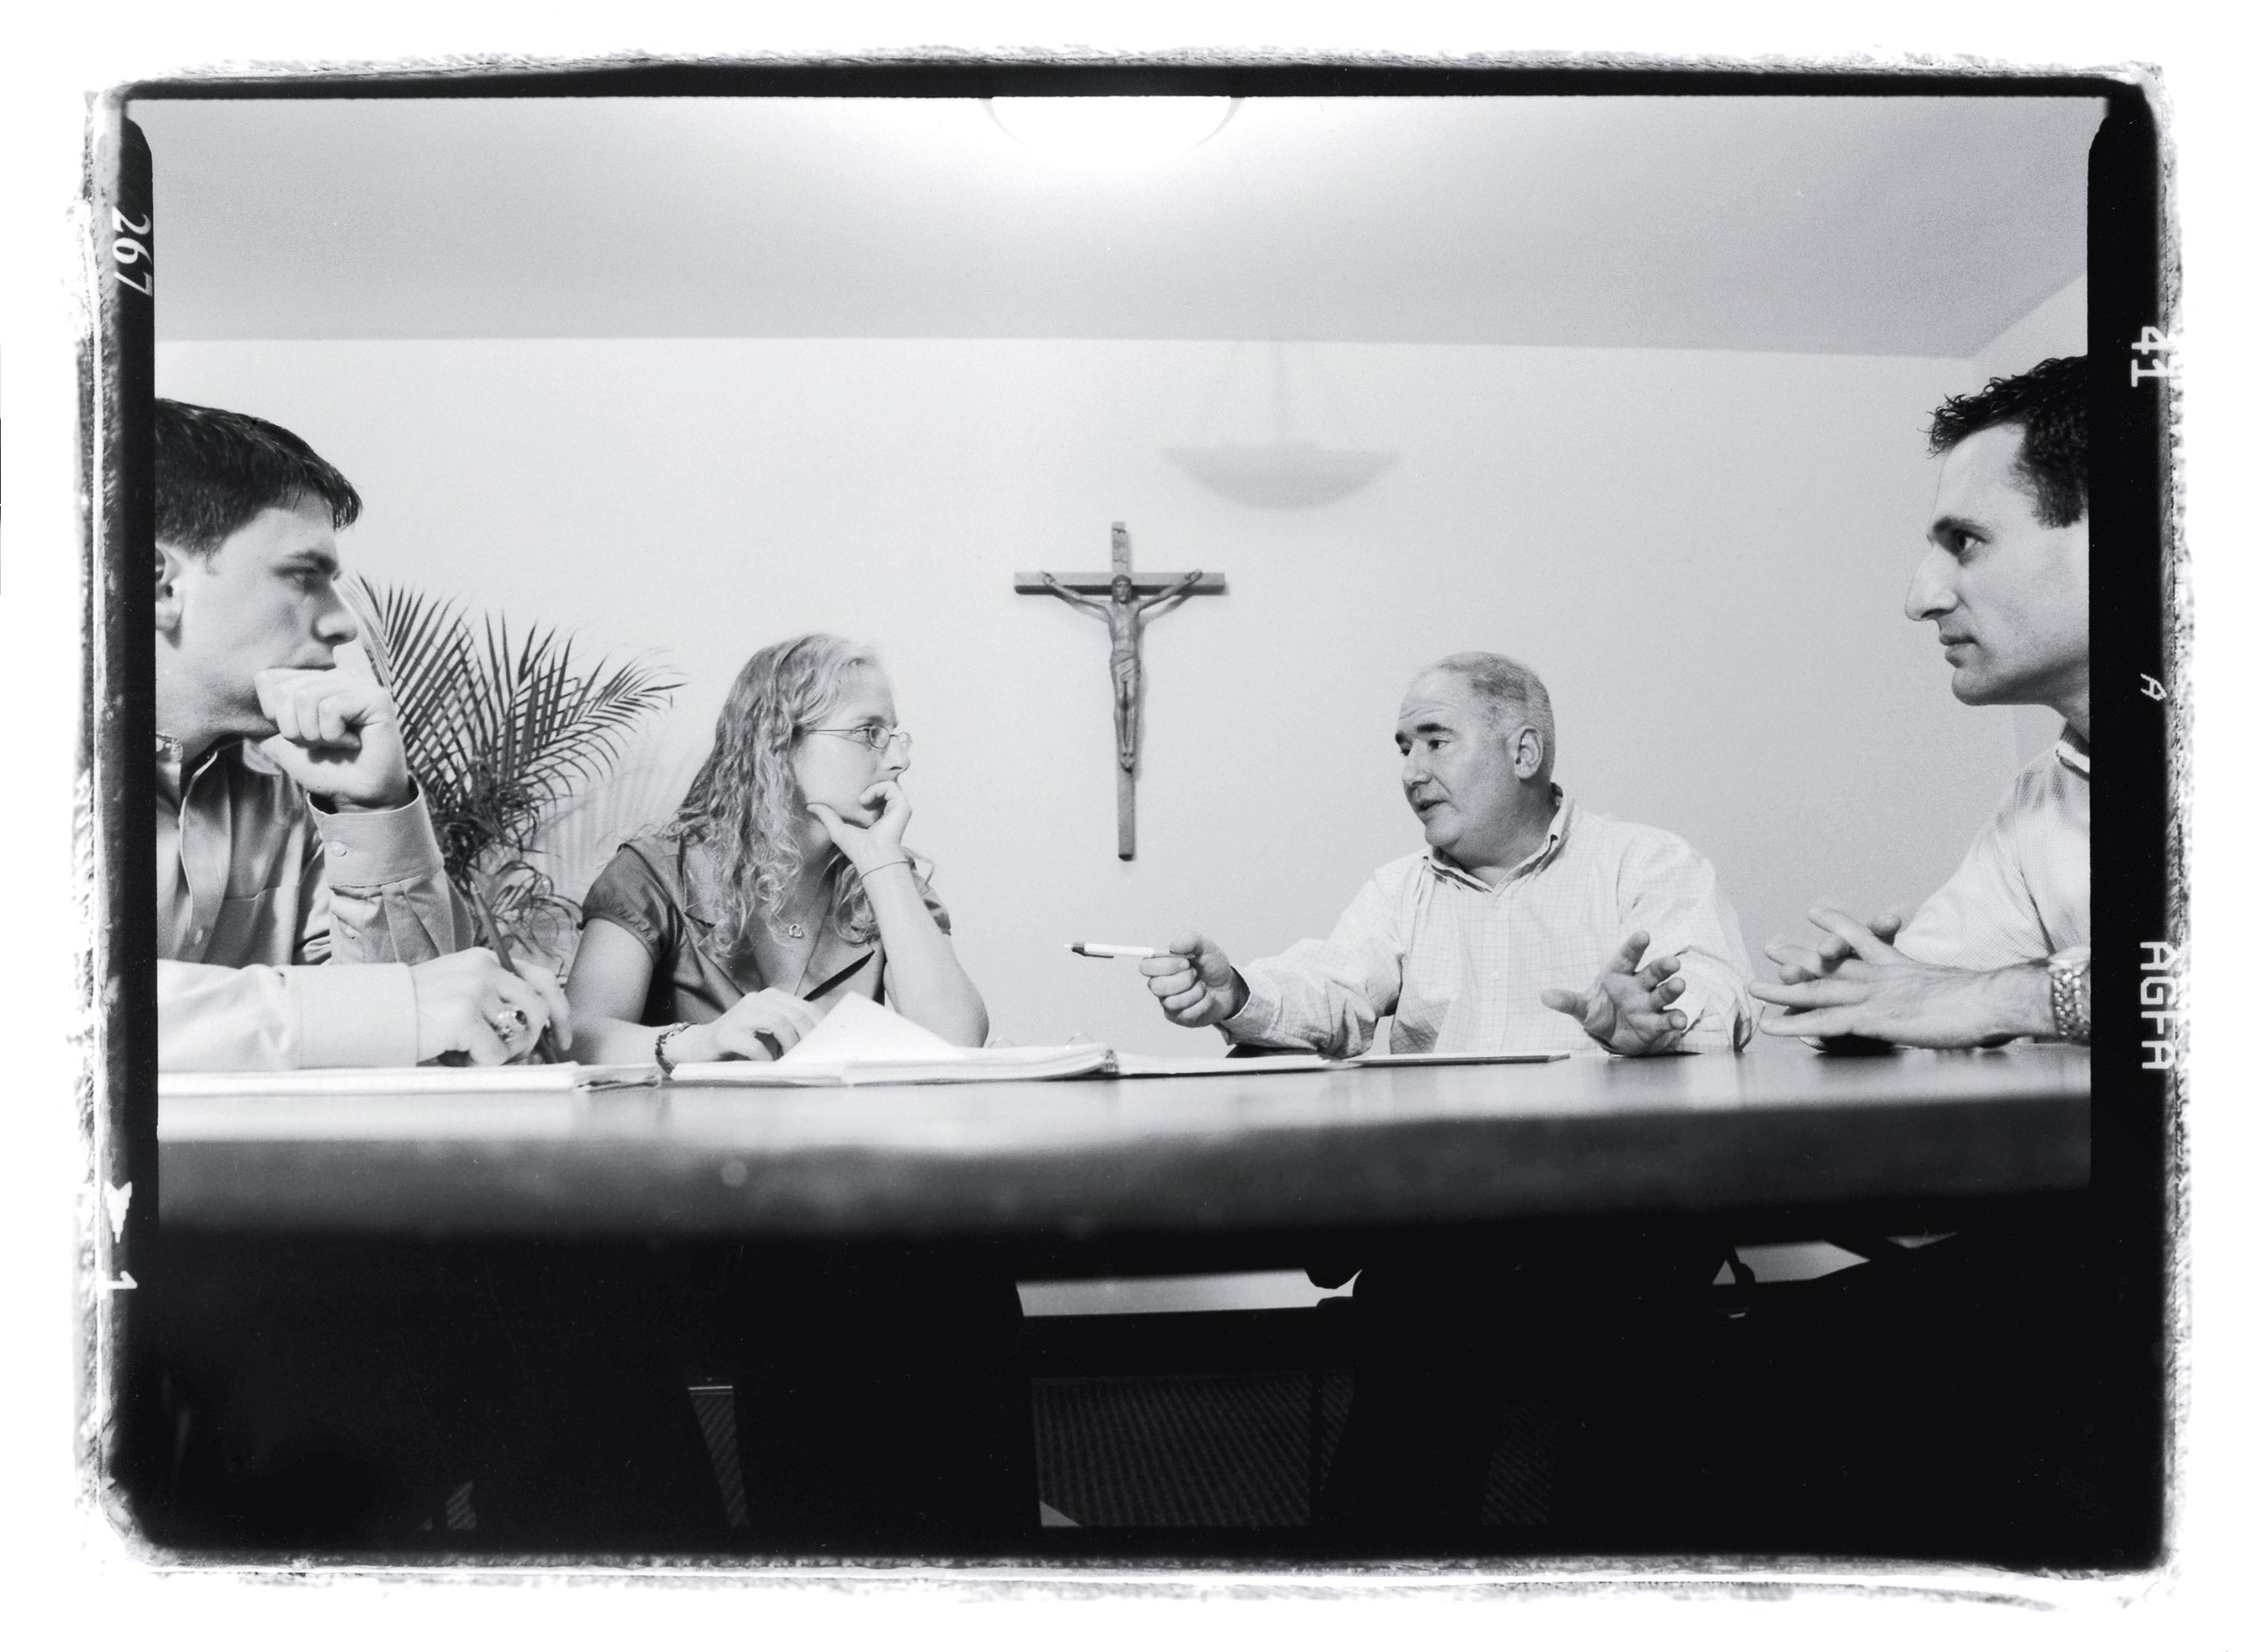 Four people sitting at a table with a cross hanging in the background